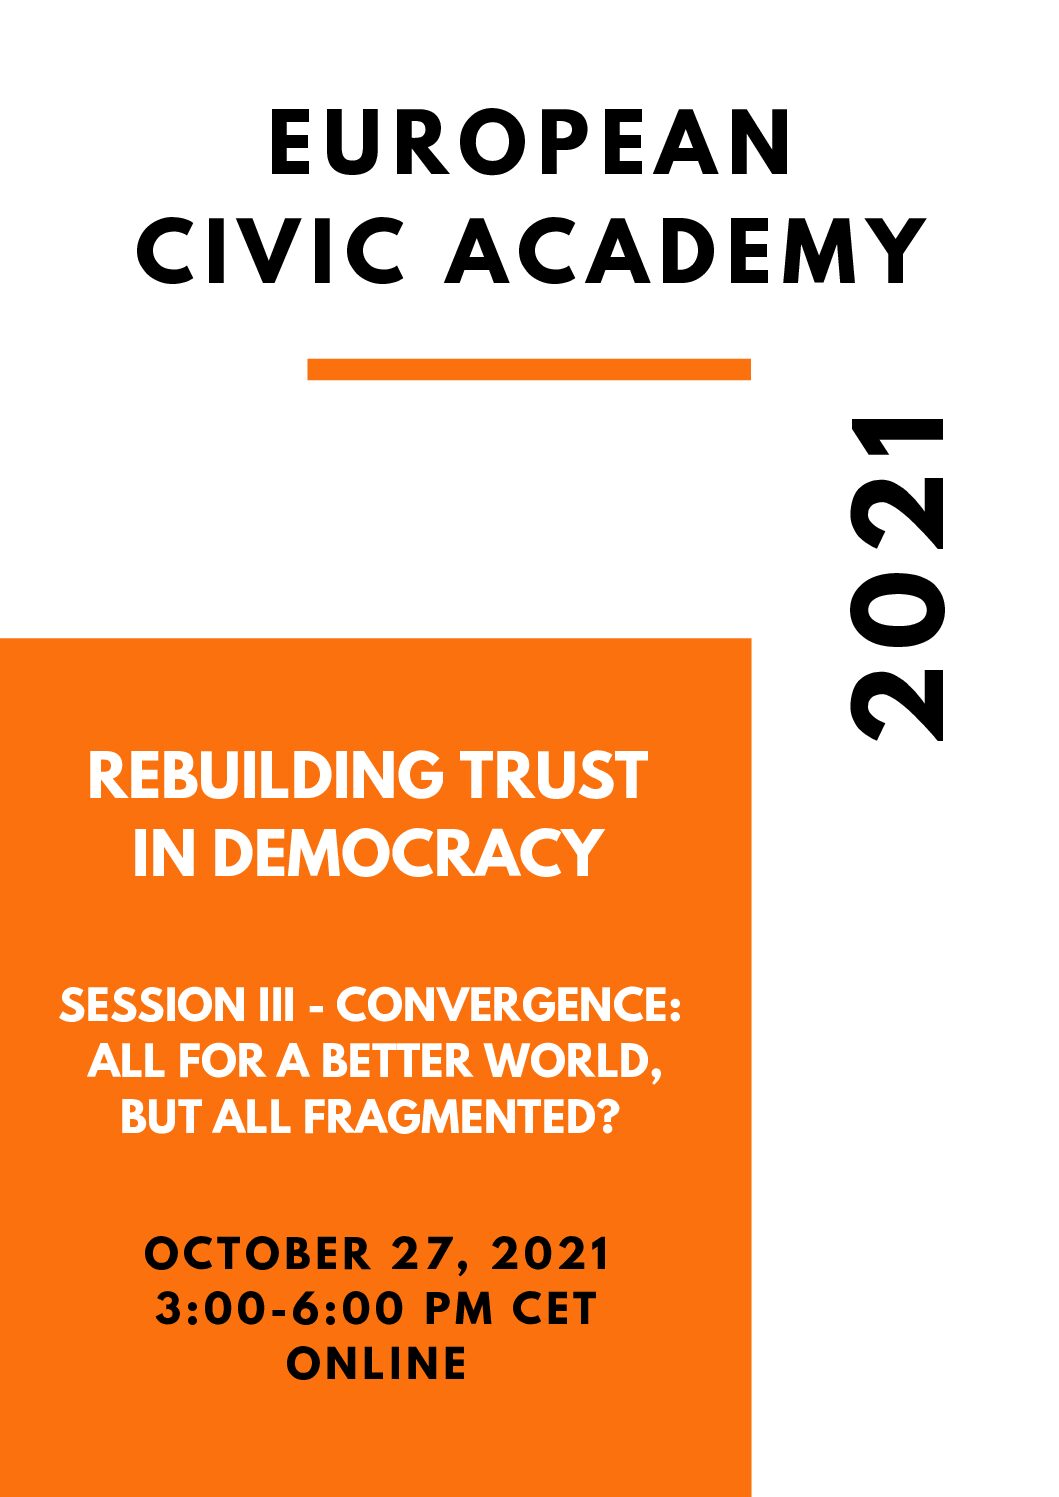 EUROPEAN CIVIC ACADEMY: Challenges & Good Practices for Multistakeholder Alliance-Building